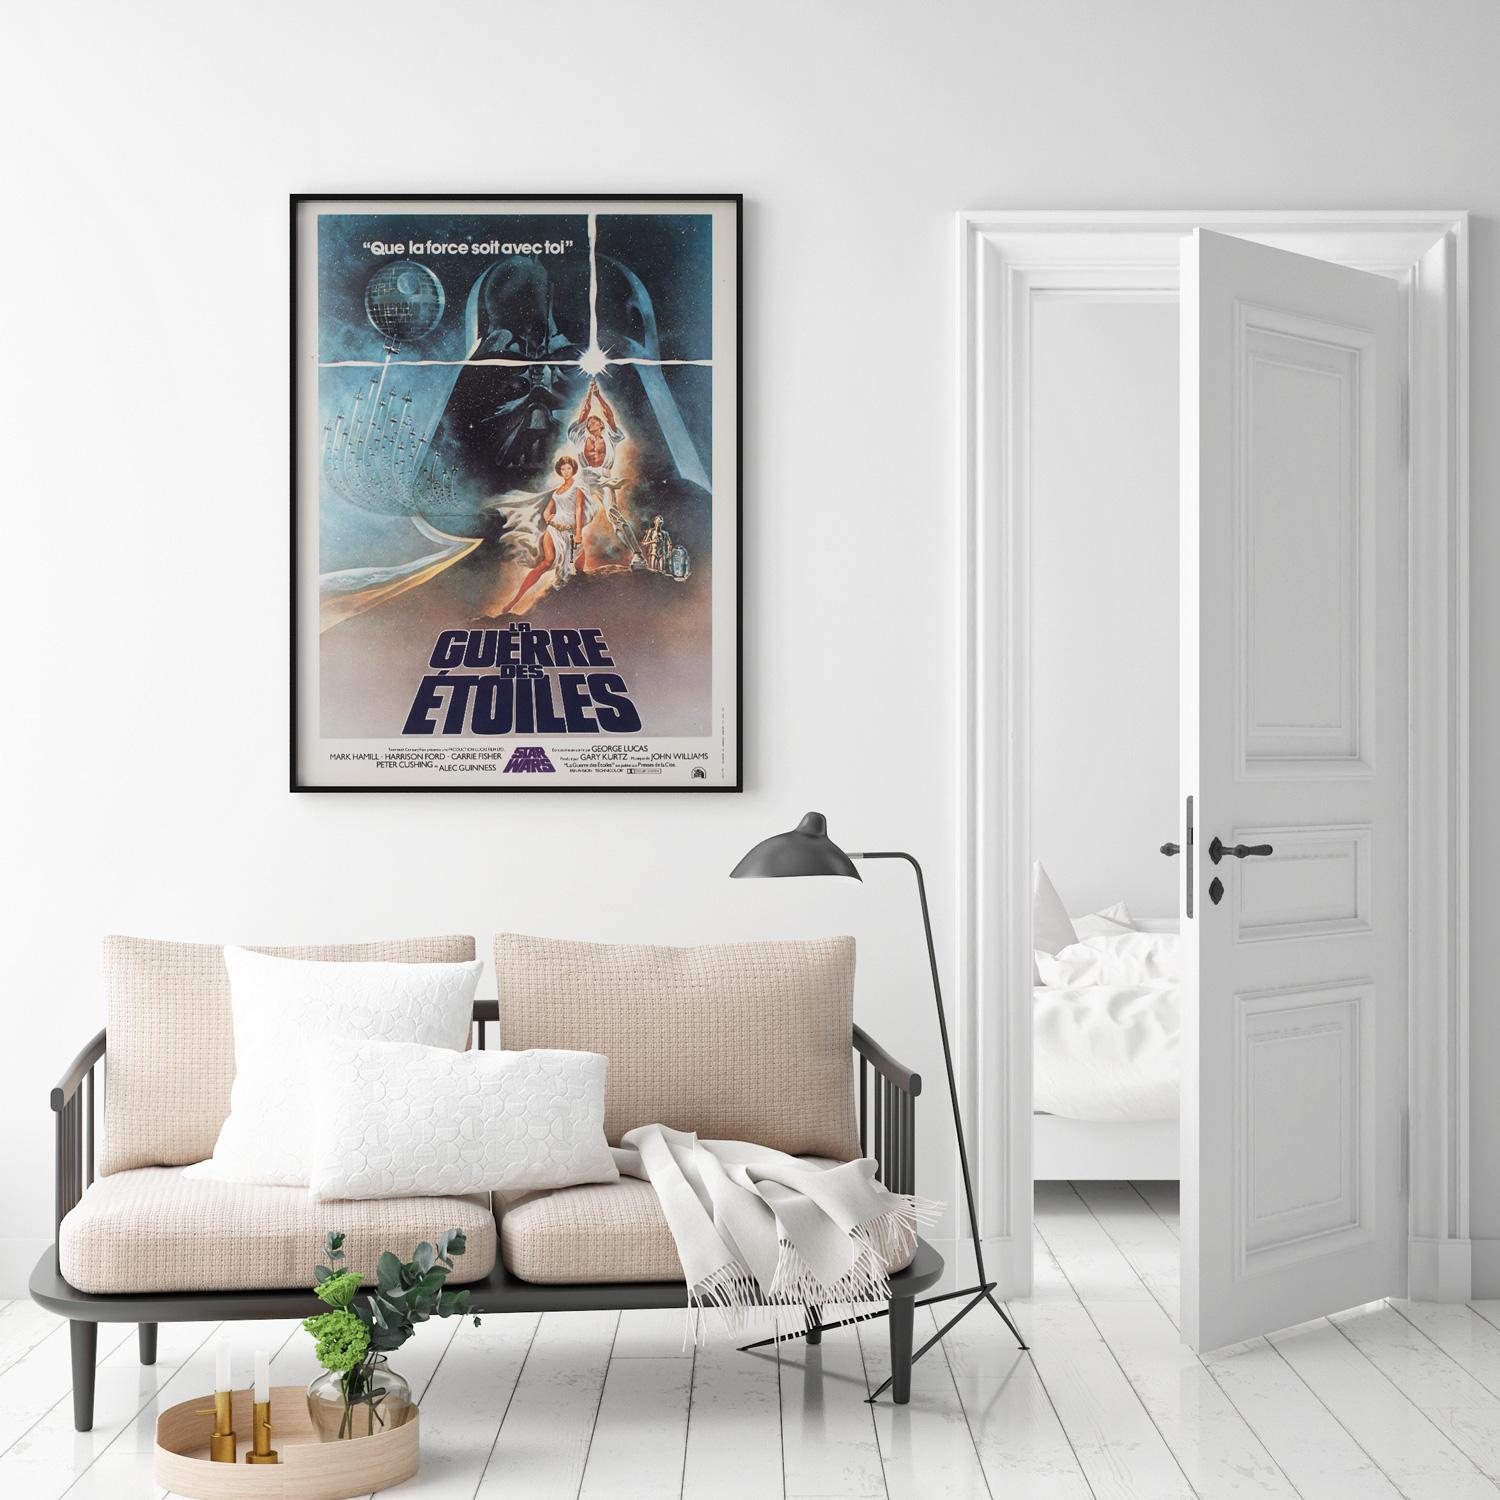 Fantastic first-year-of-release French Moyenne film poster for Star Wars featuring Tom Jung's classic design. In wonderful Near Mint/Mint linen-backed condition.

This original vintage movie poster has been professionally linen-backed is sized an